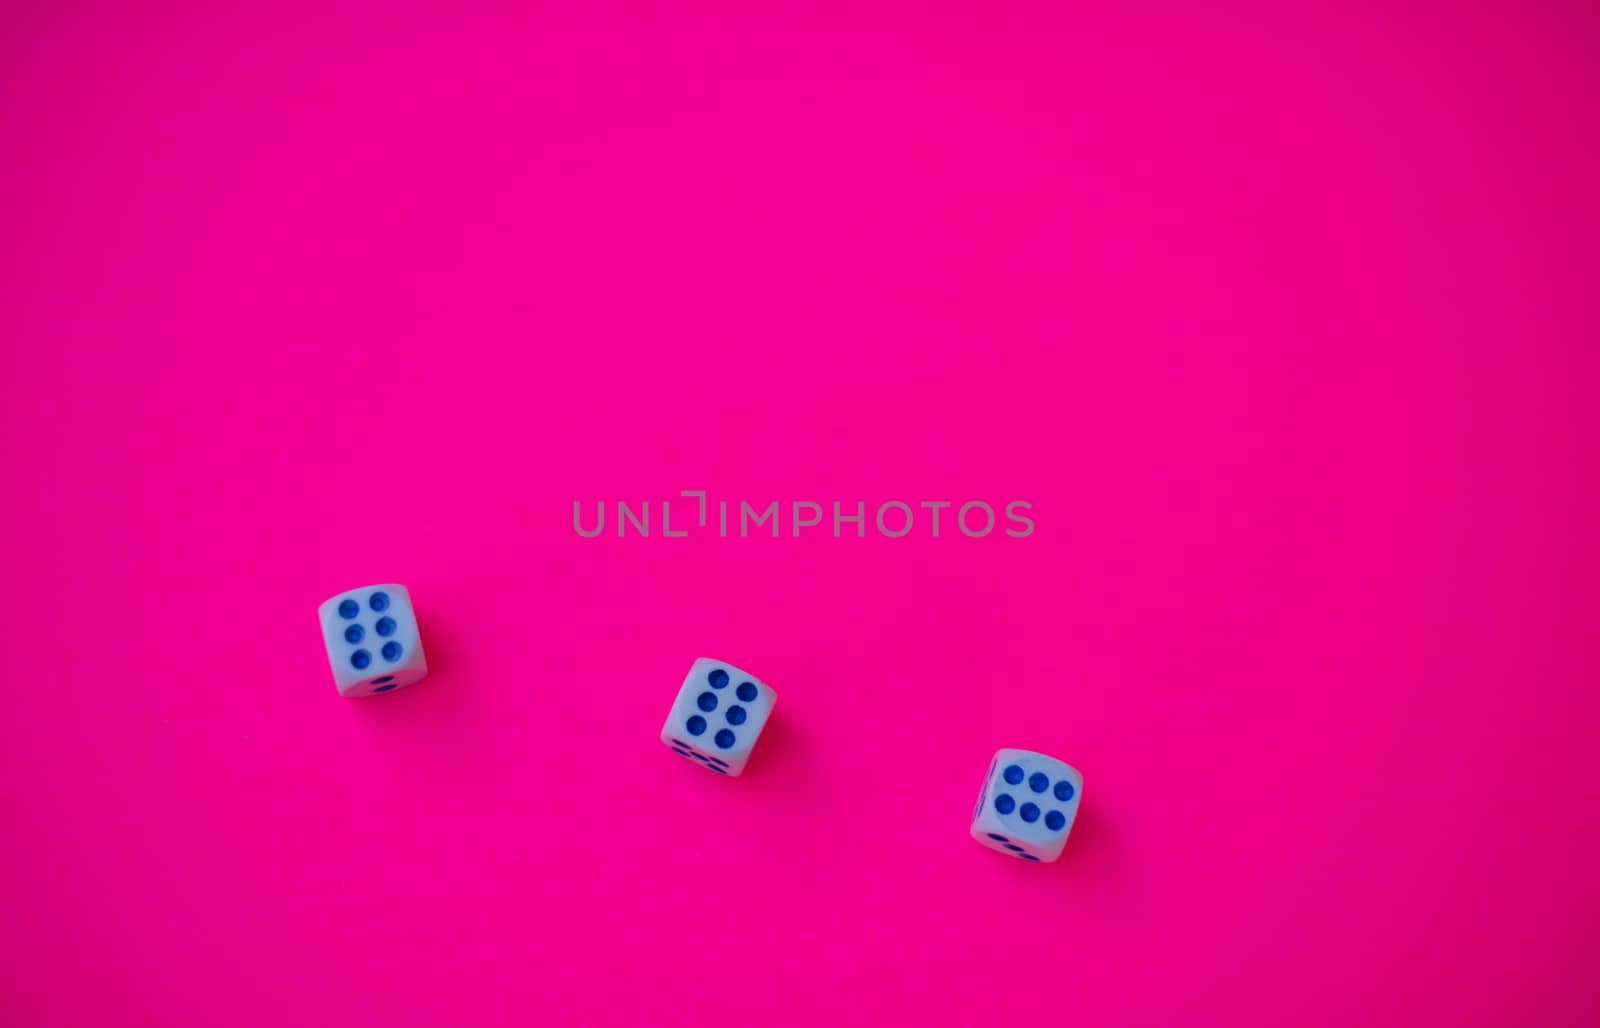 Dice isolated against colorful background shot from above by rushay